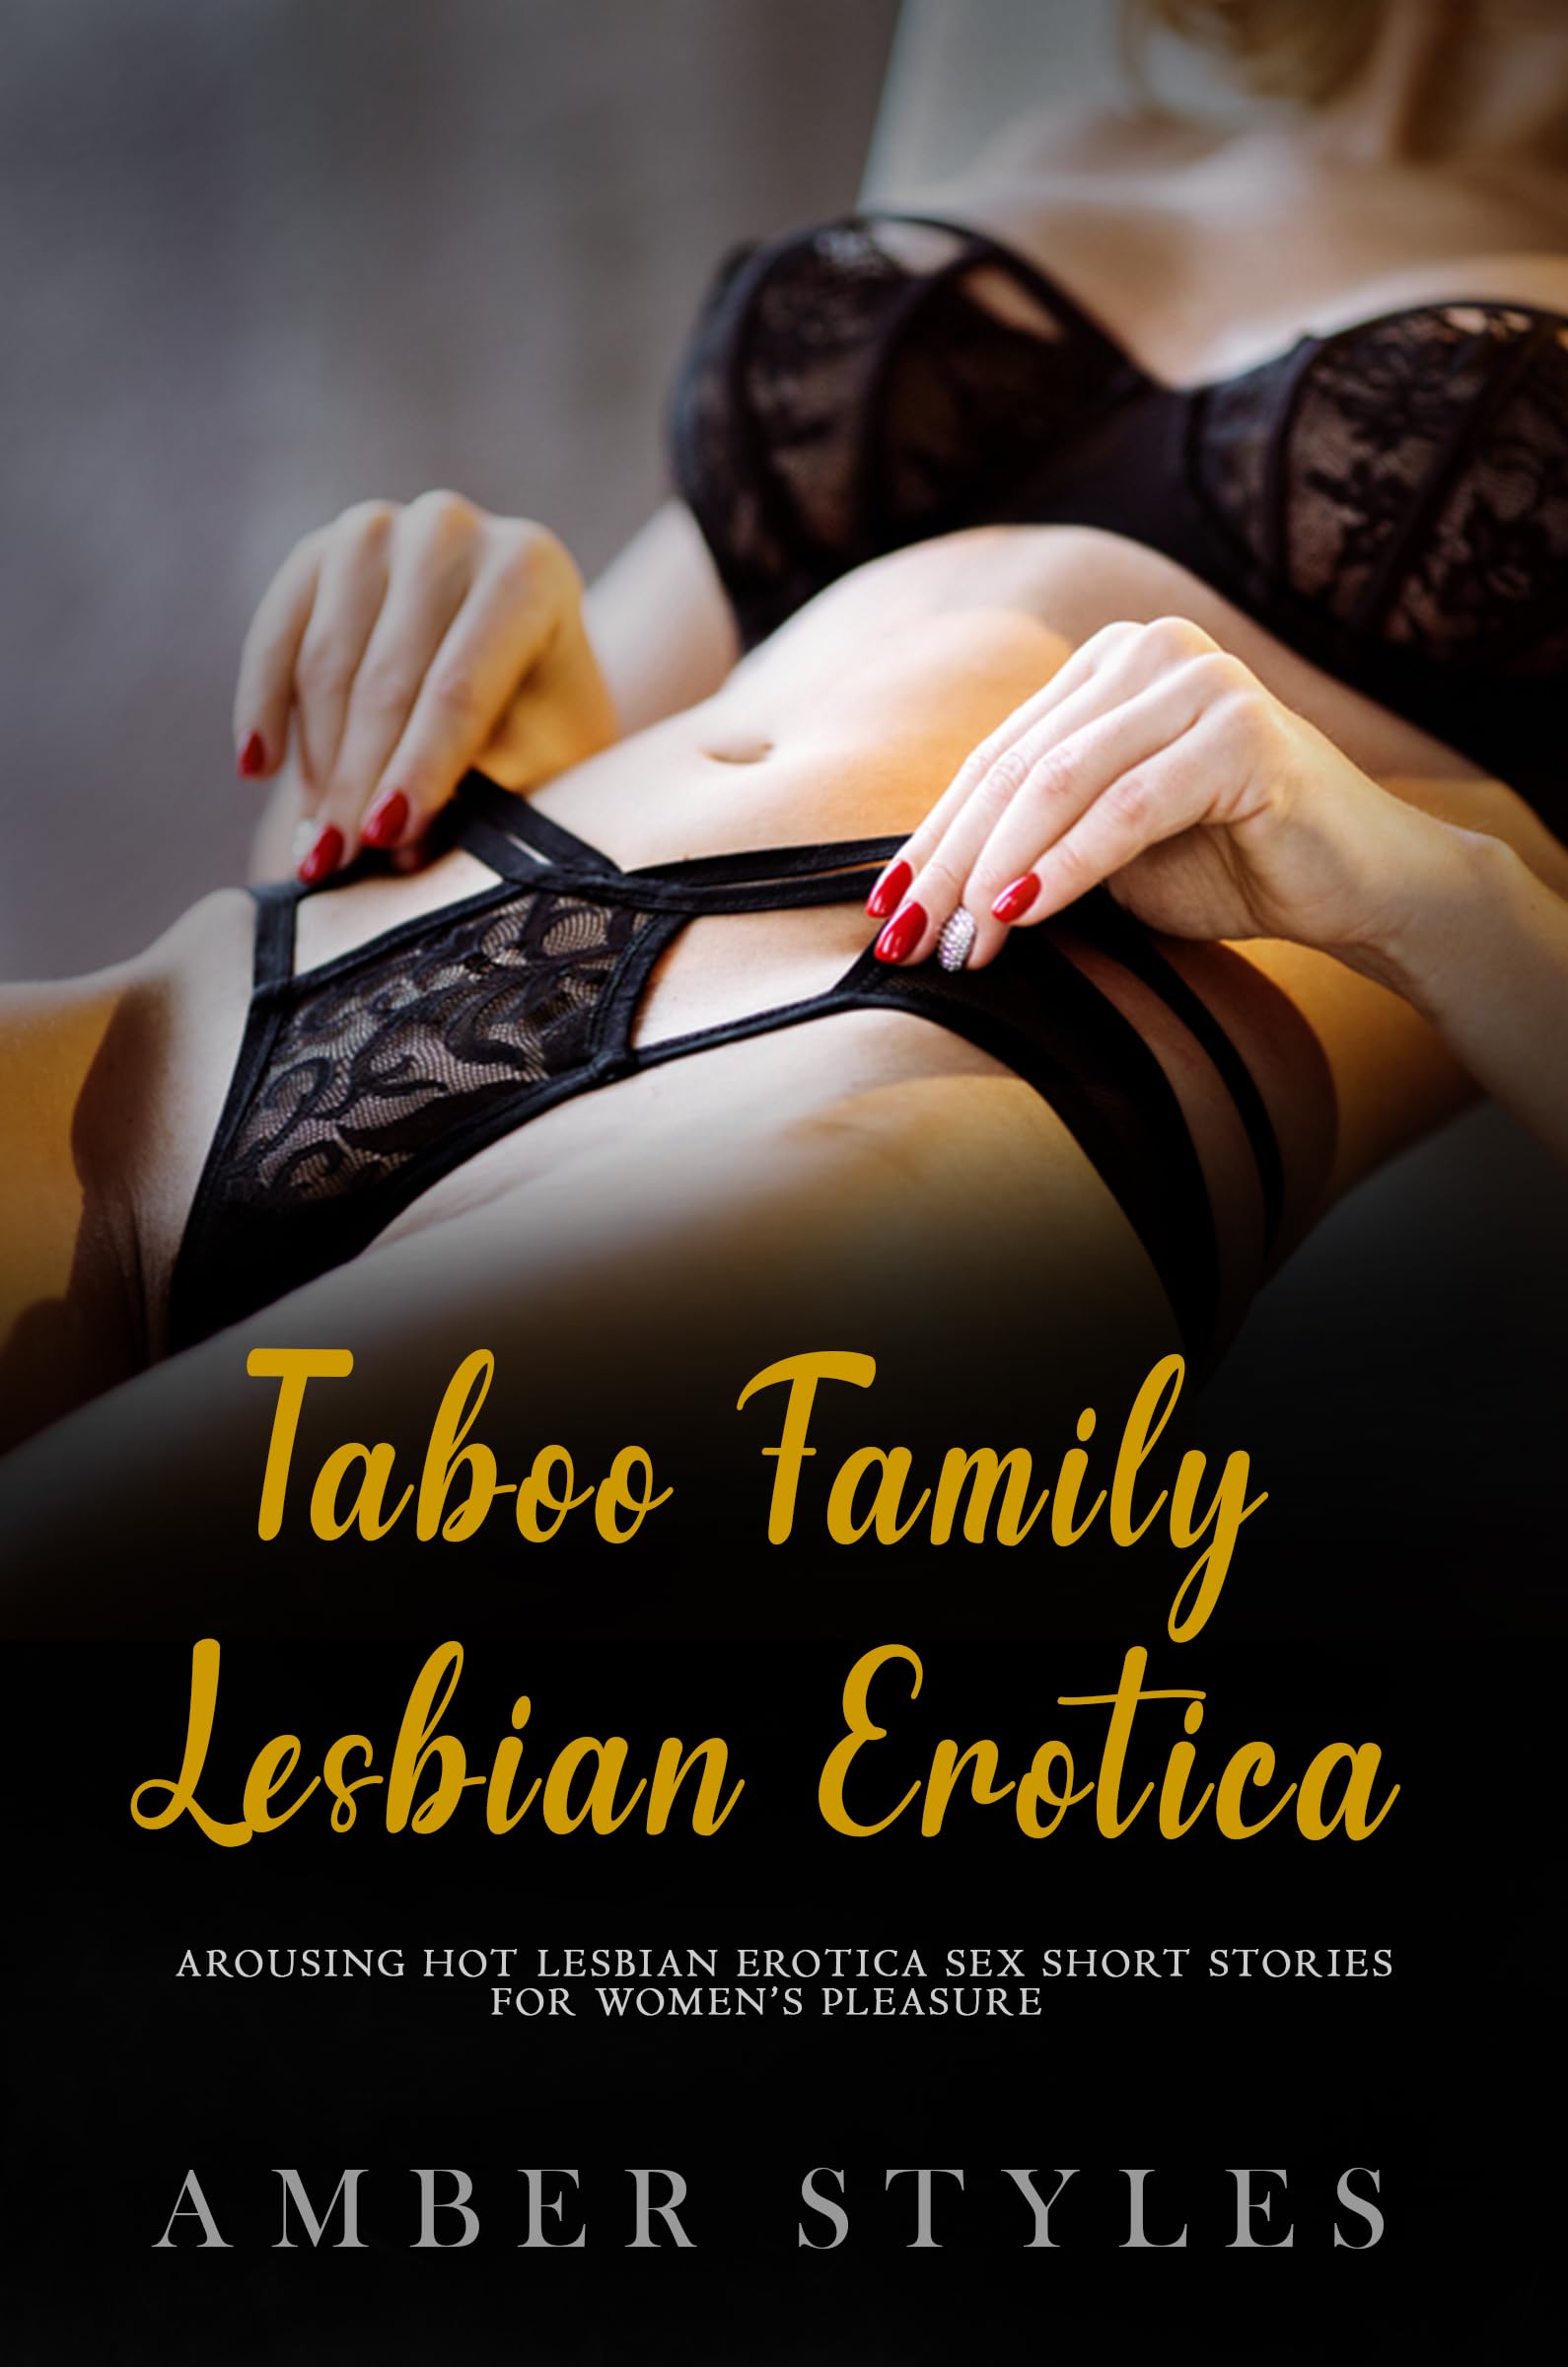 ced mike add photo lesbian family sex stories